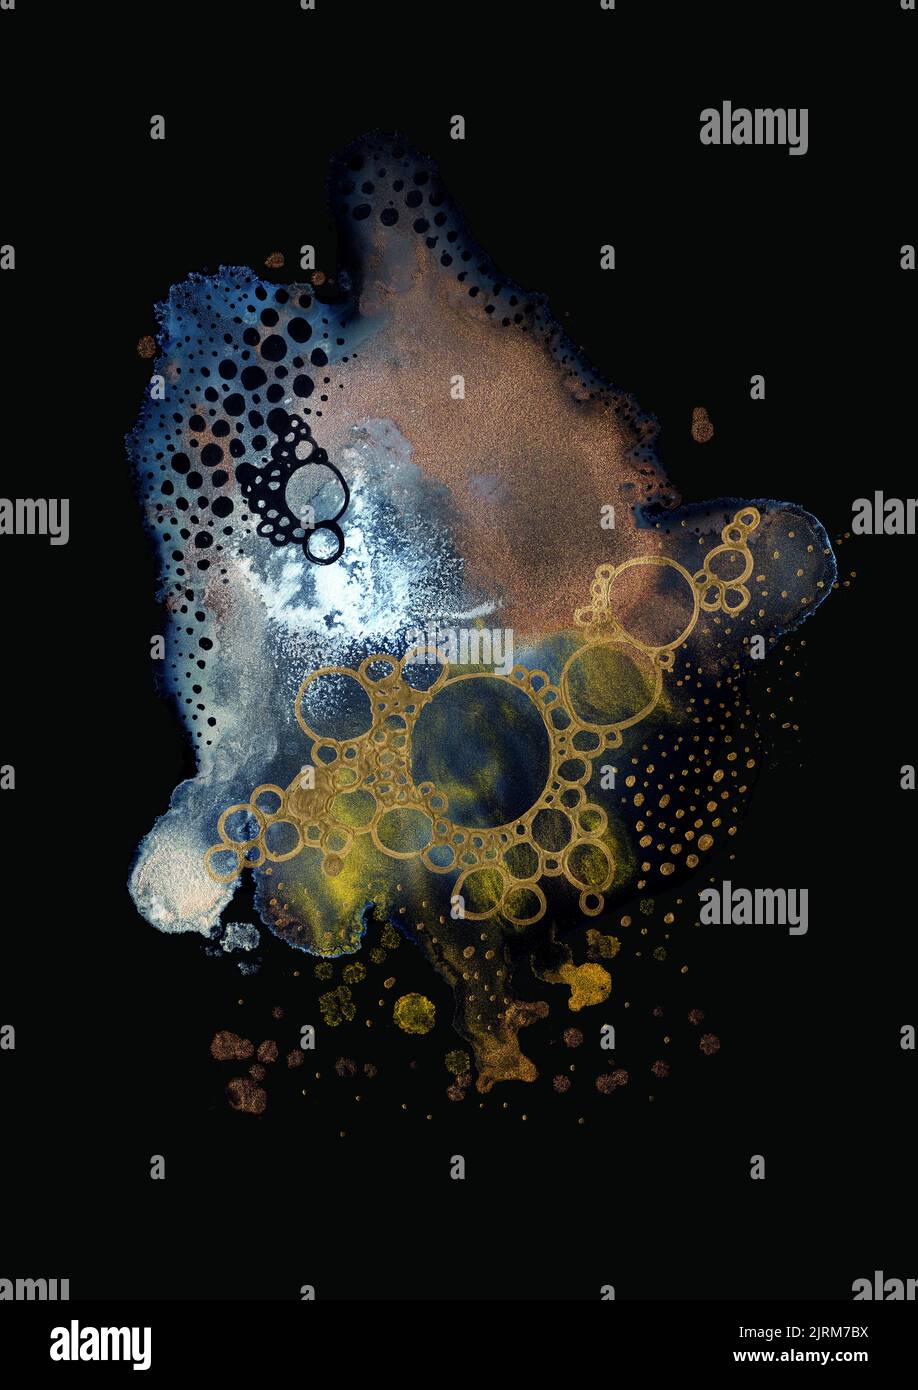 black, gold, white, dark field microscopy inspired , Abstract biomorphic watercolour and ink specimens with a cellular  bubble like structure Stock Photo